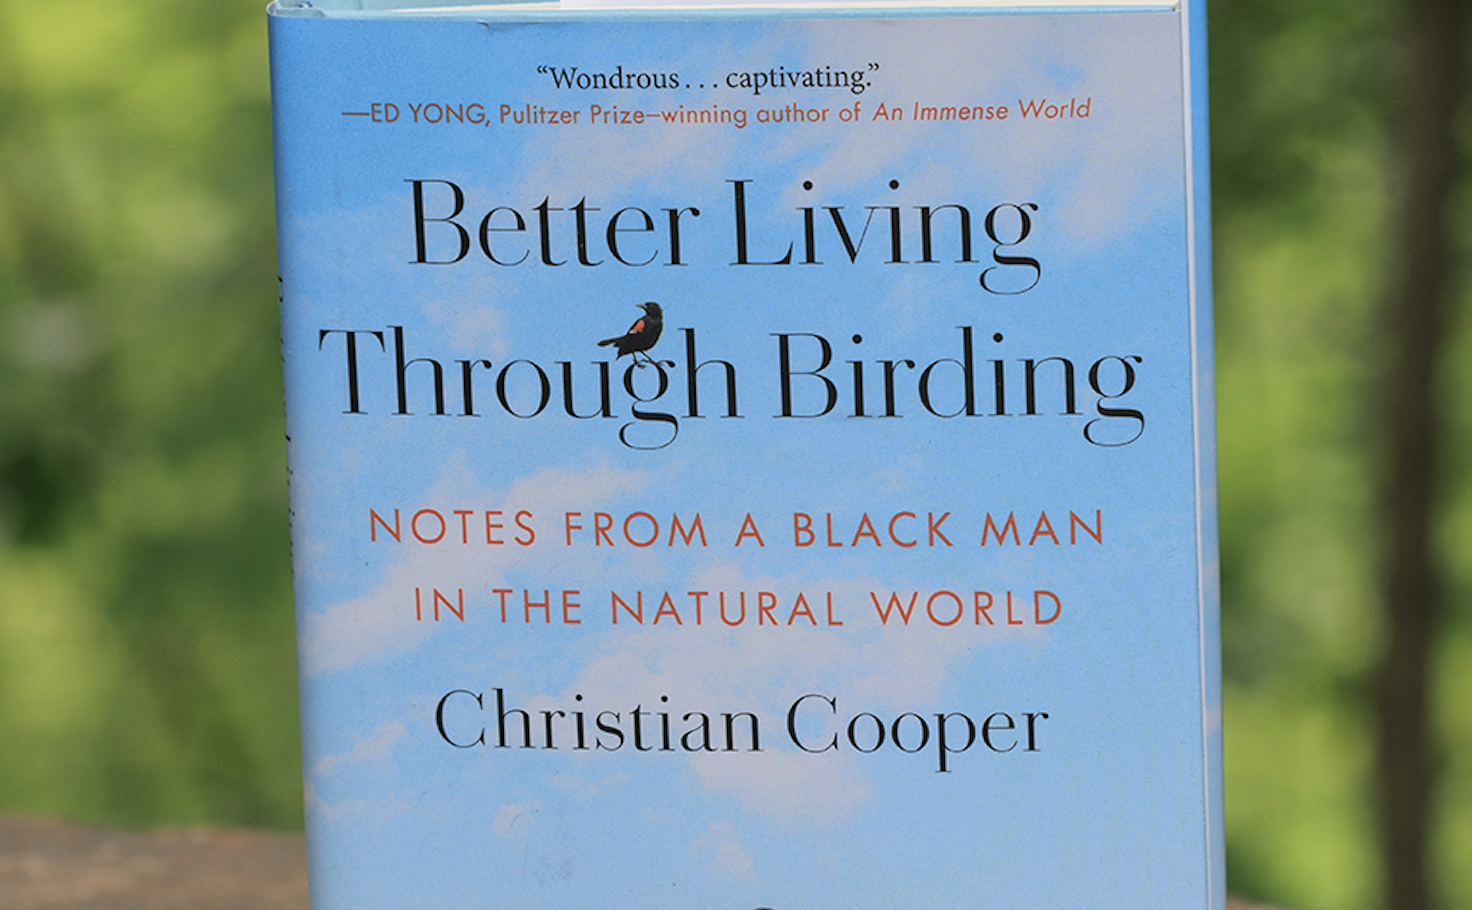 Better Living Through Birding book against a natural background. (photo © Conservancy for Cuyahoga National Park)